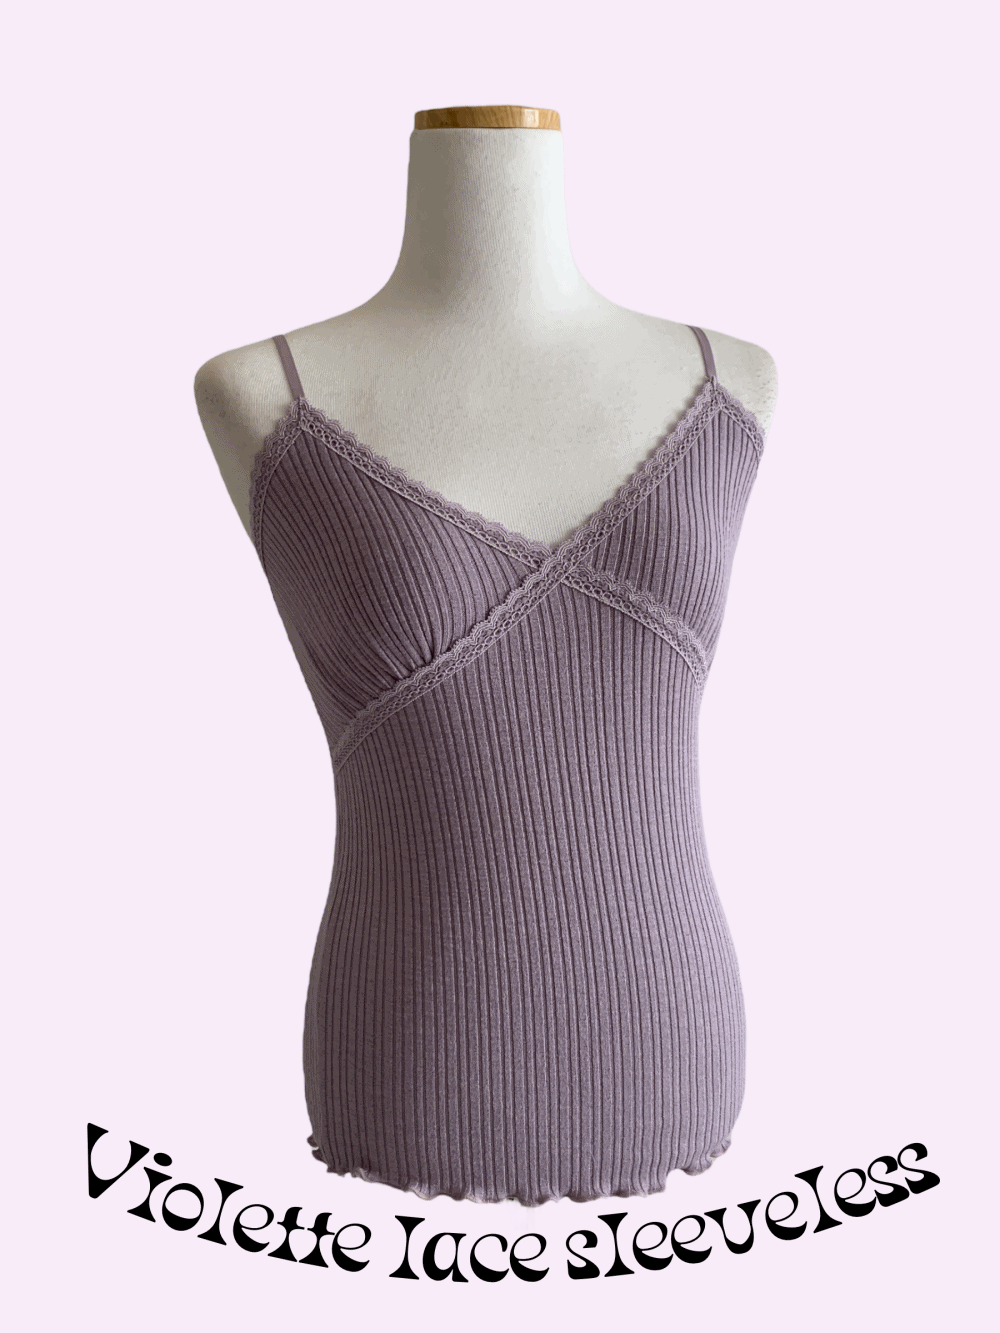 [Innerwear] Violette lace sleeveless / 4 colors